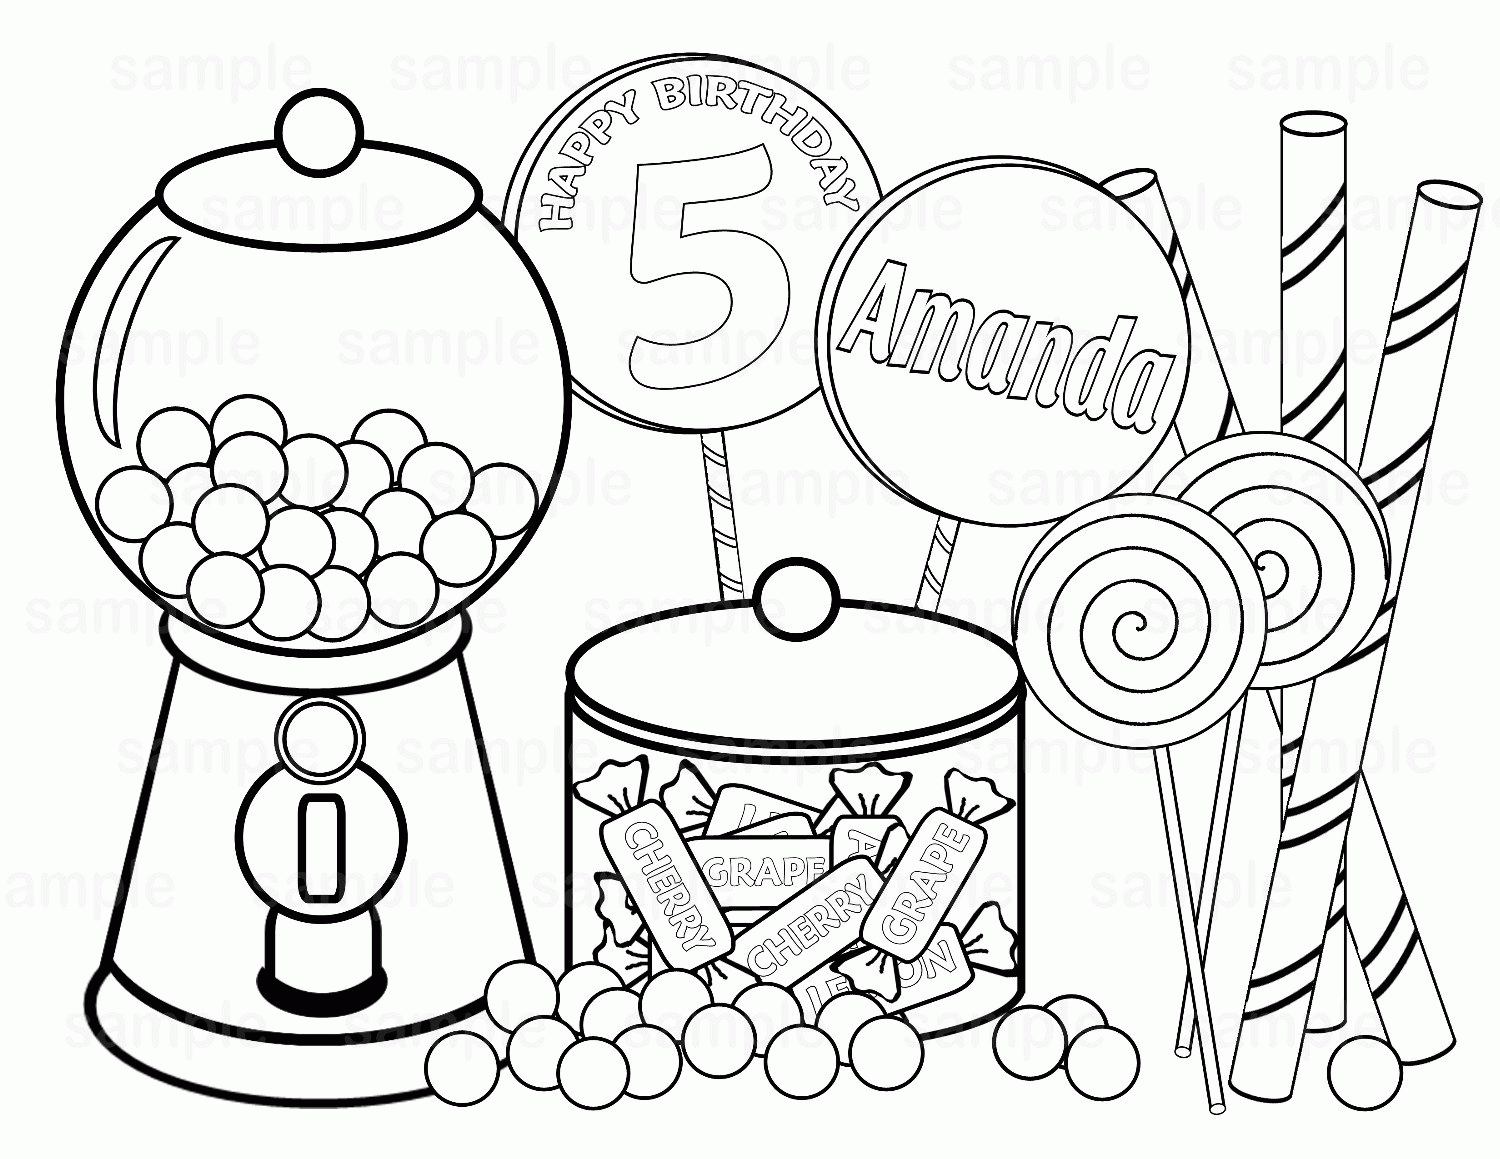 Candies Coloring Page - Free Printable Coloring Pages for Kids